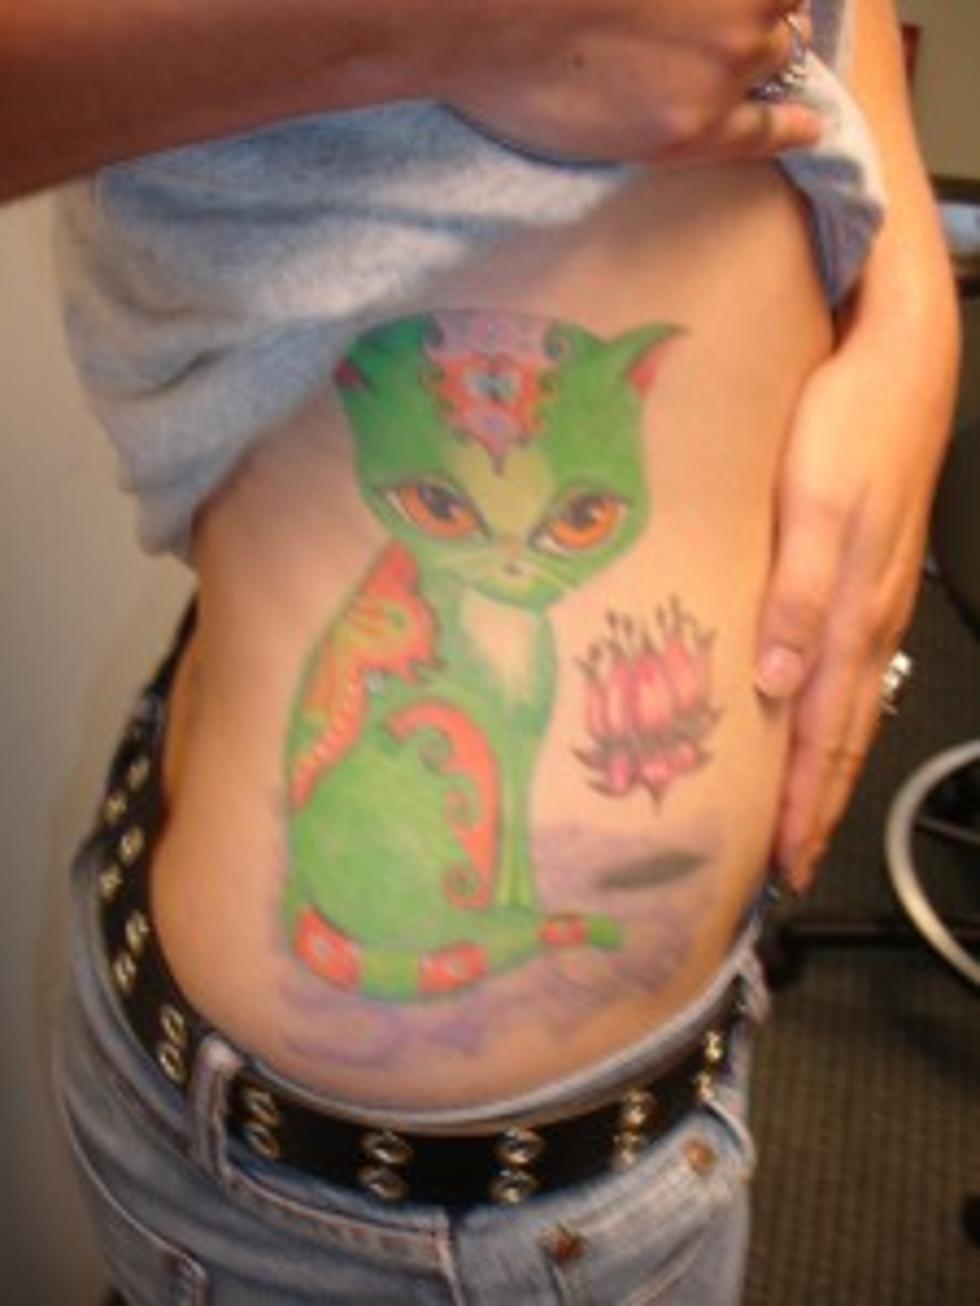 Does Kat&#8217;s Cat Tattoo Actually Look Like a Frog? [PICTURE]